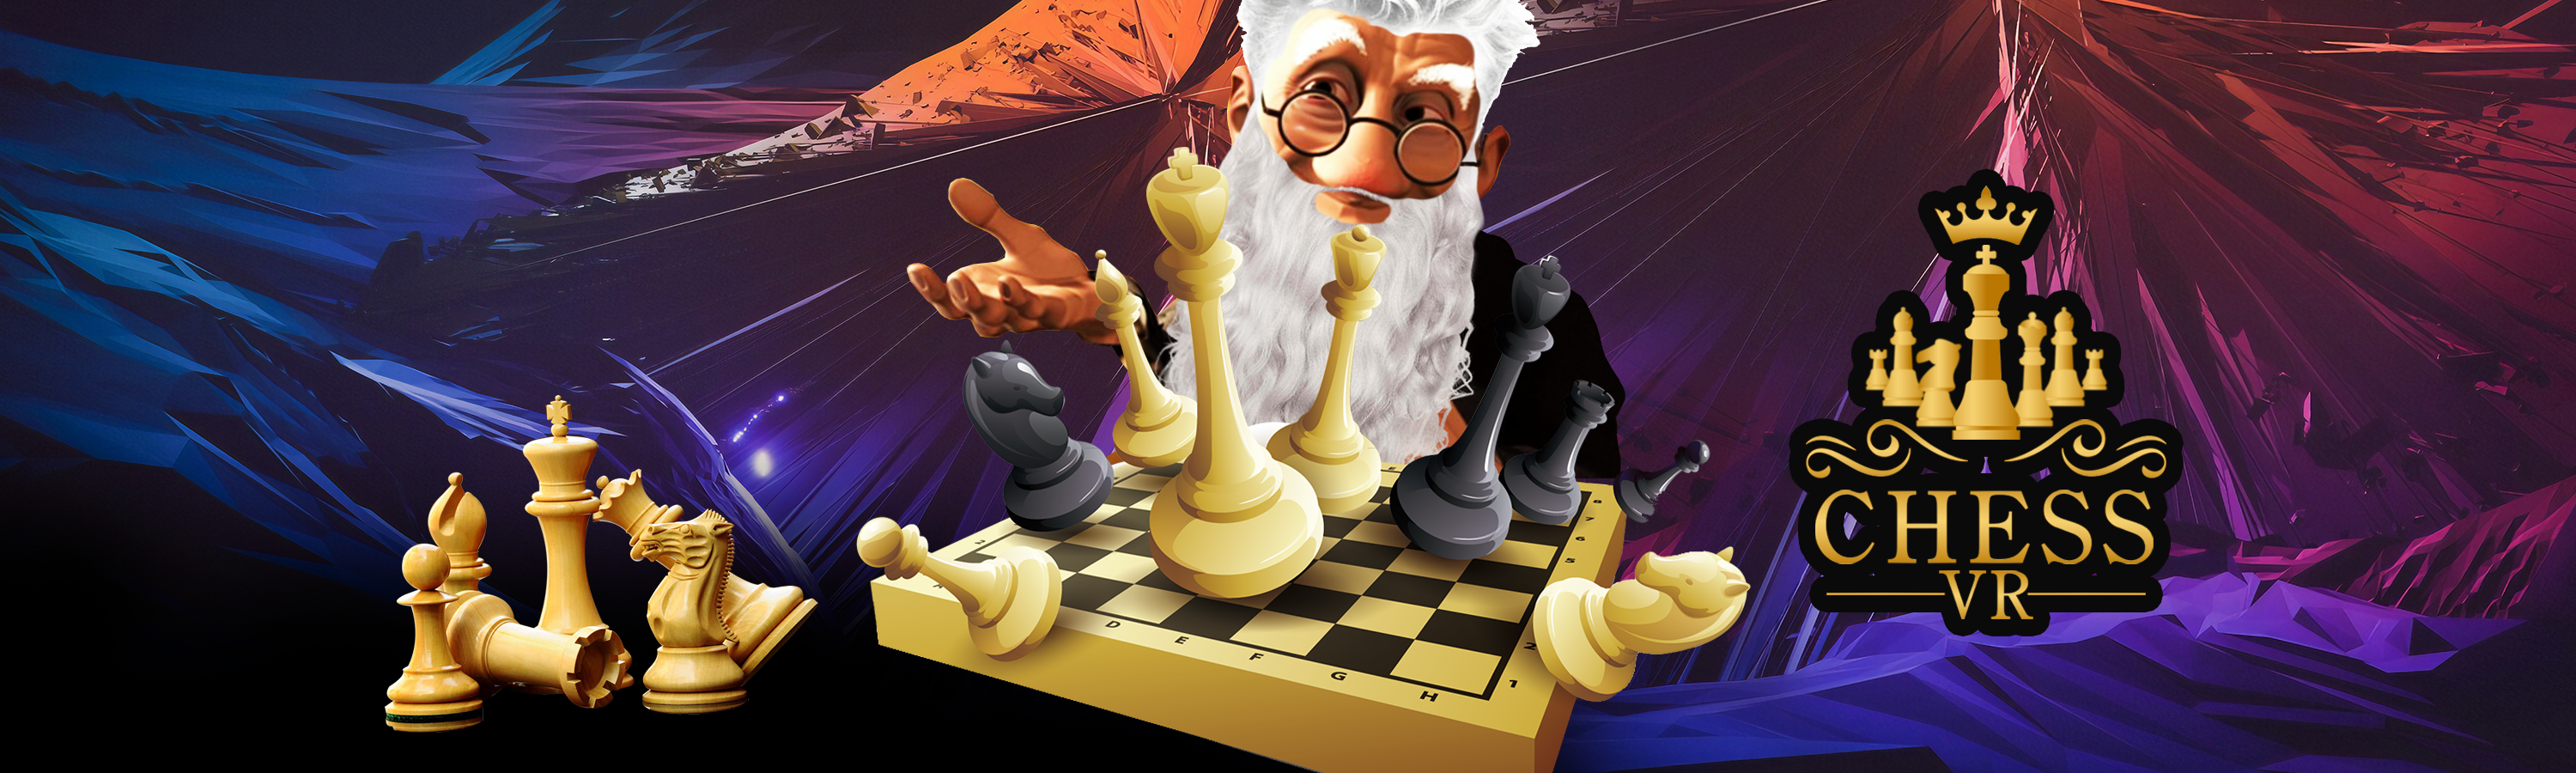 The latest look at our upcoming VR chess game- Ultimate Chess VR! :  r/OculusQuest